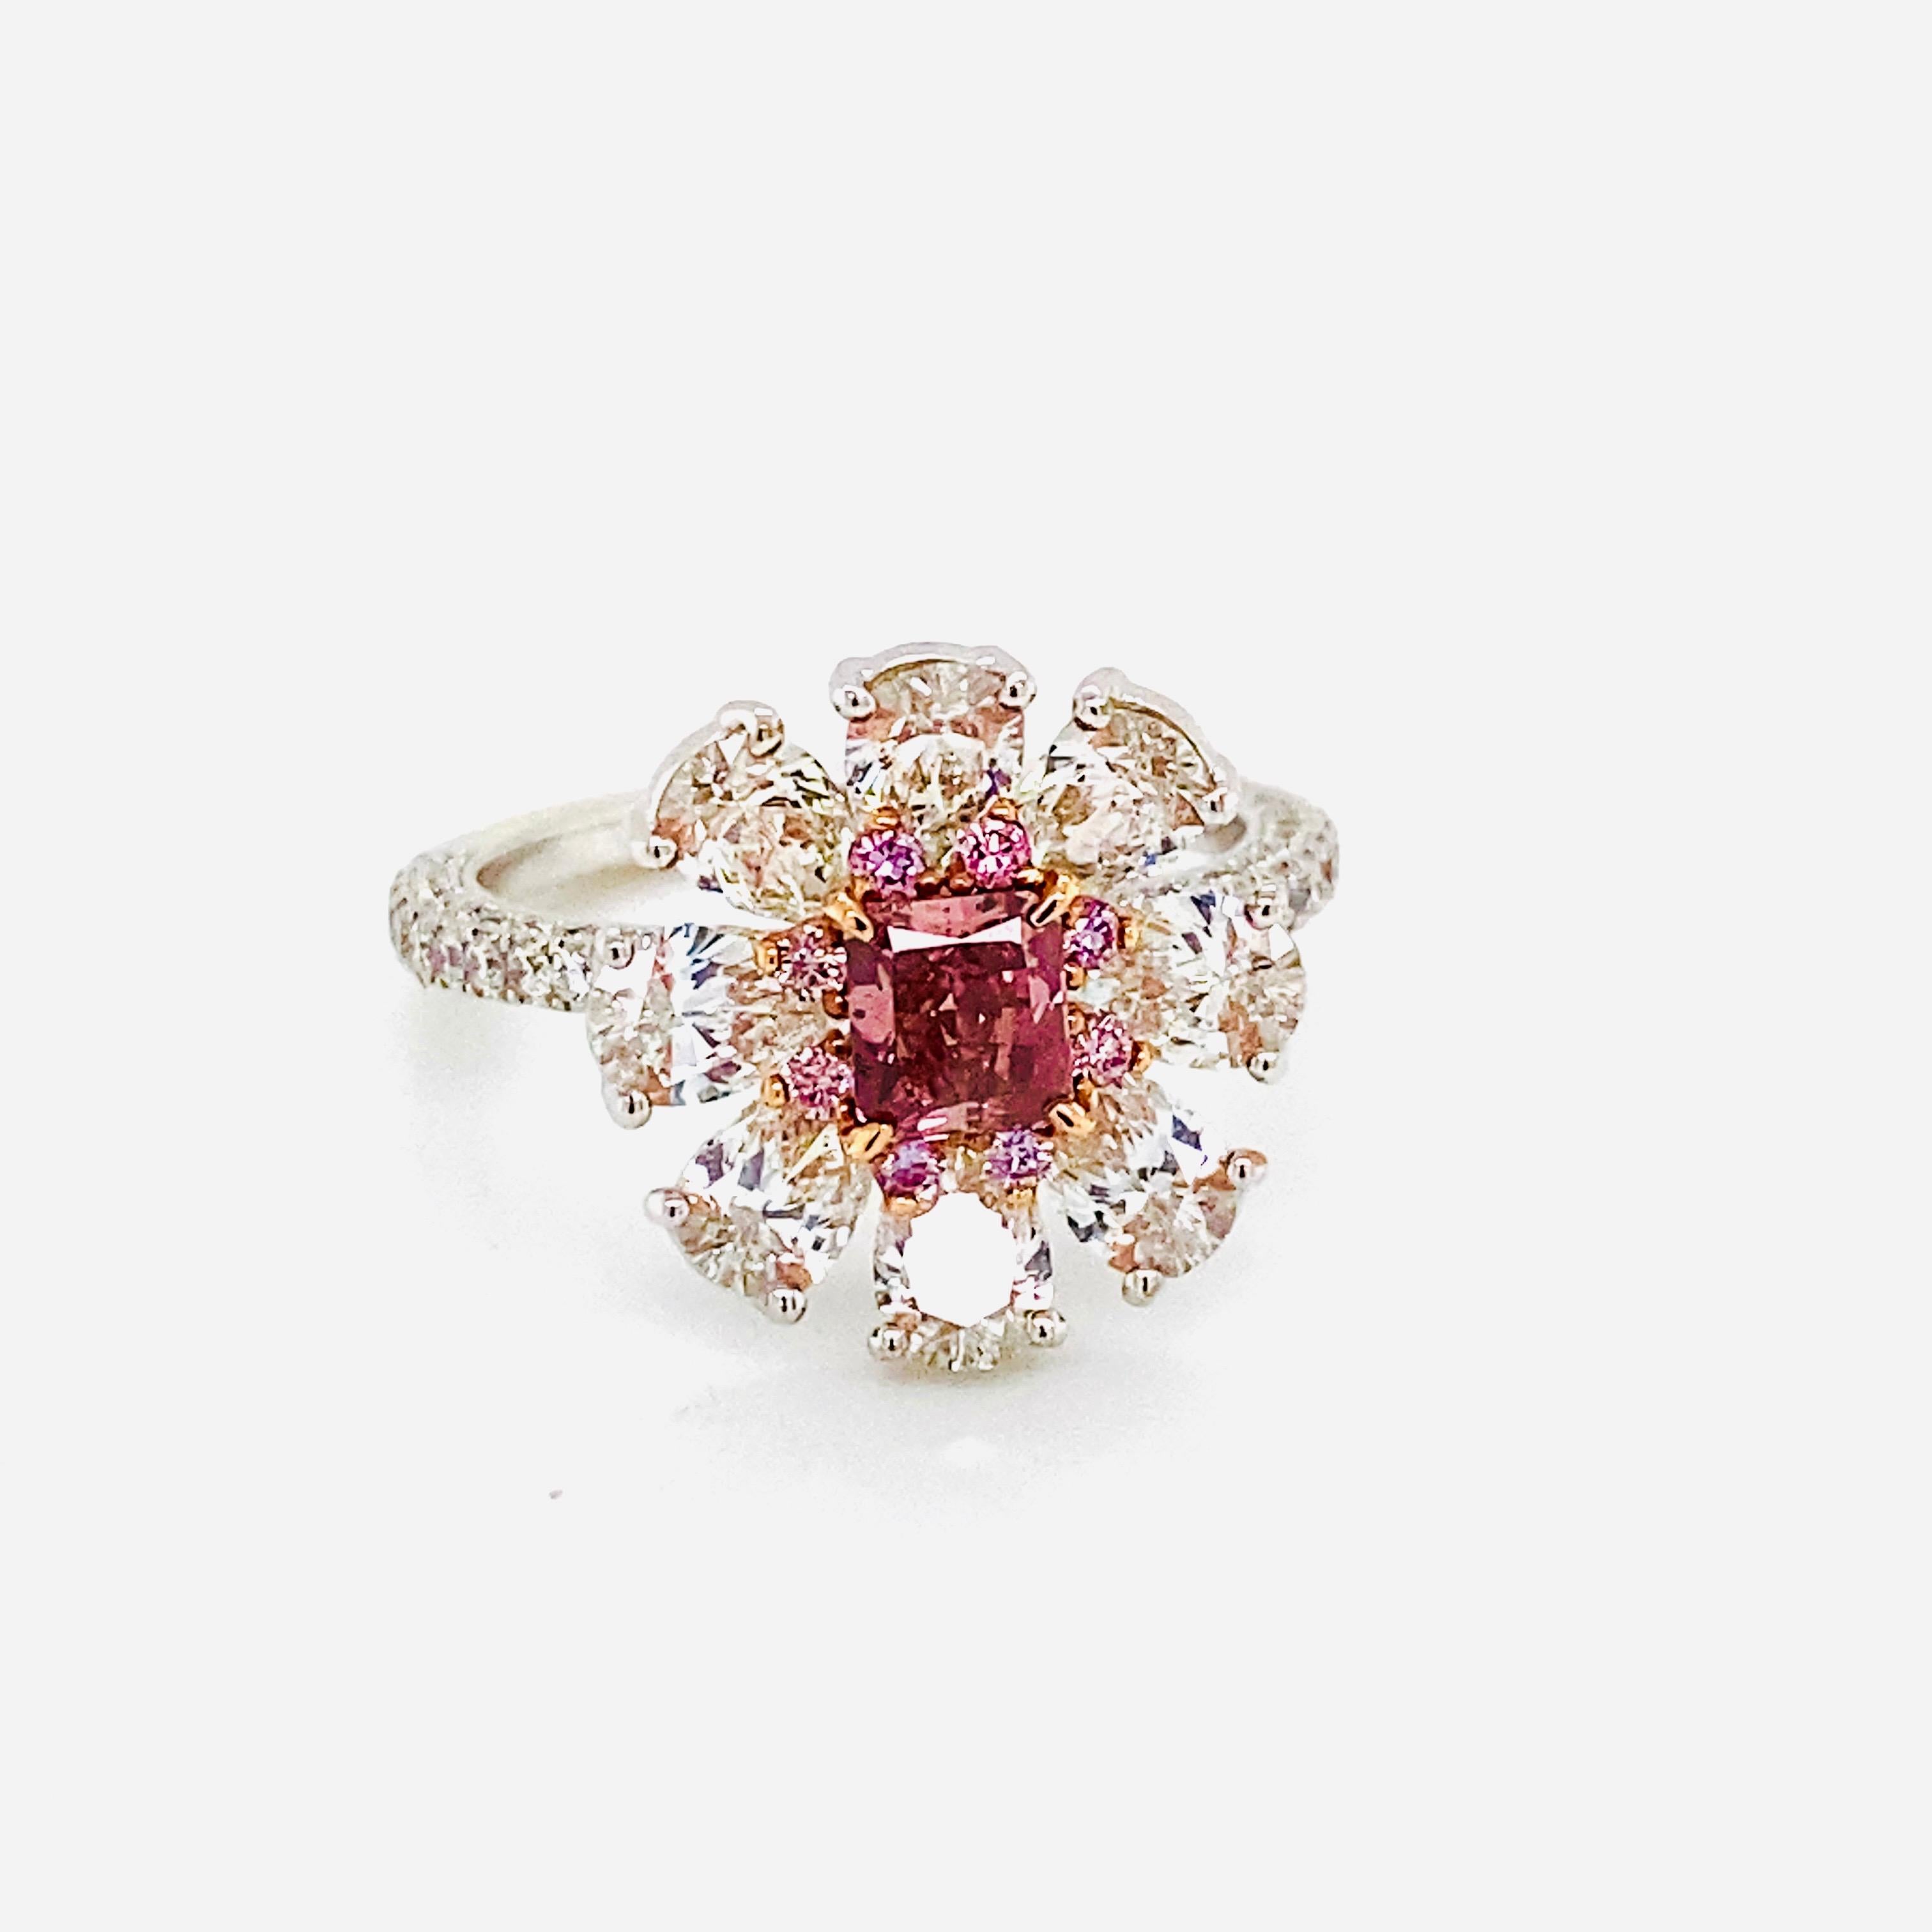 From The Museum Vault At Emilio Jewelry New York,
The rarest color in the diamond spectrum, a natural fancy red diamond center with no overtone! Avid passionate collectors are always on the search for natural red diamonds of any size. The center